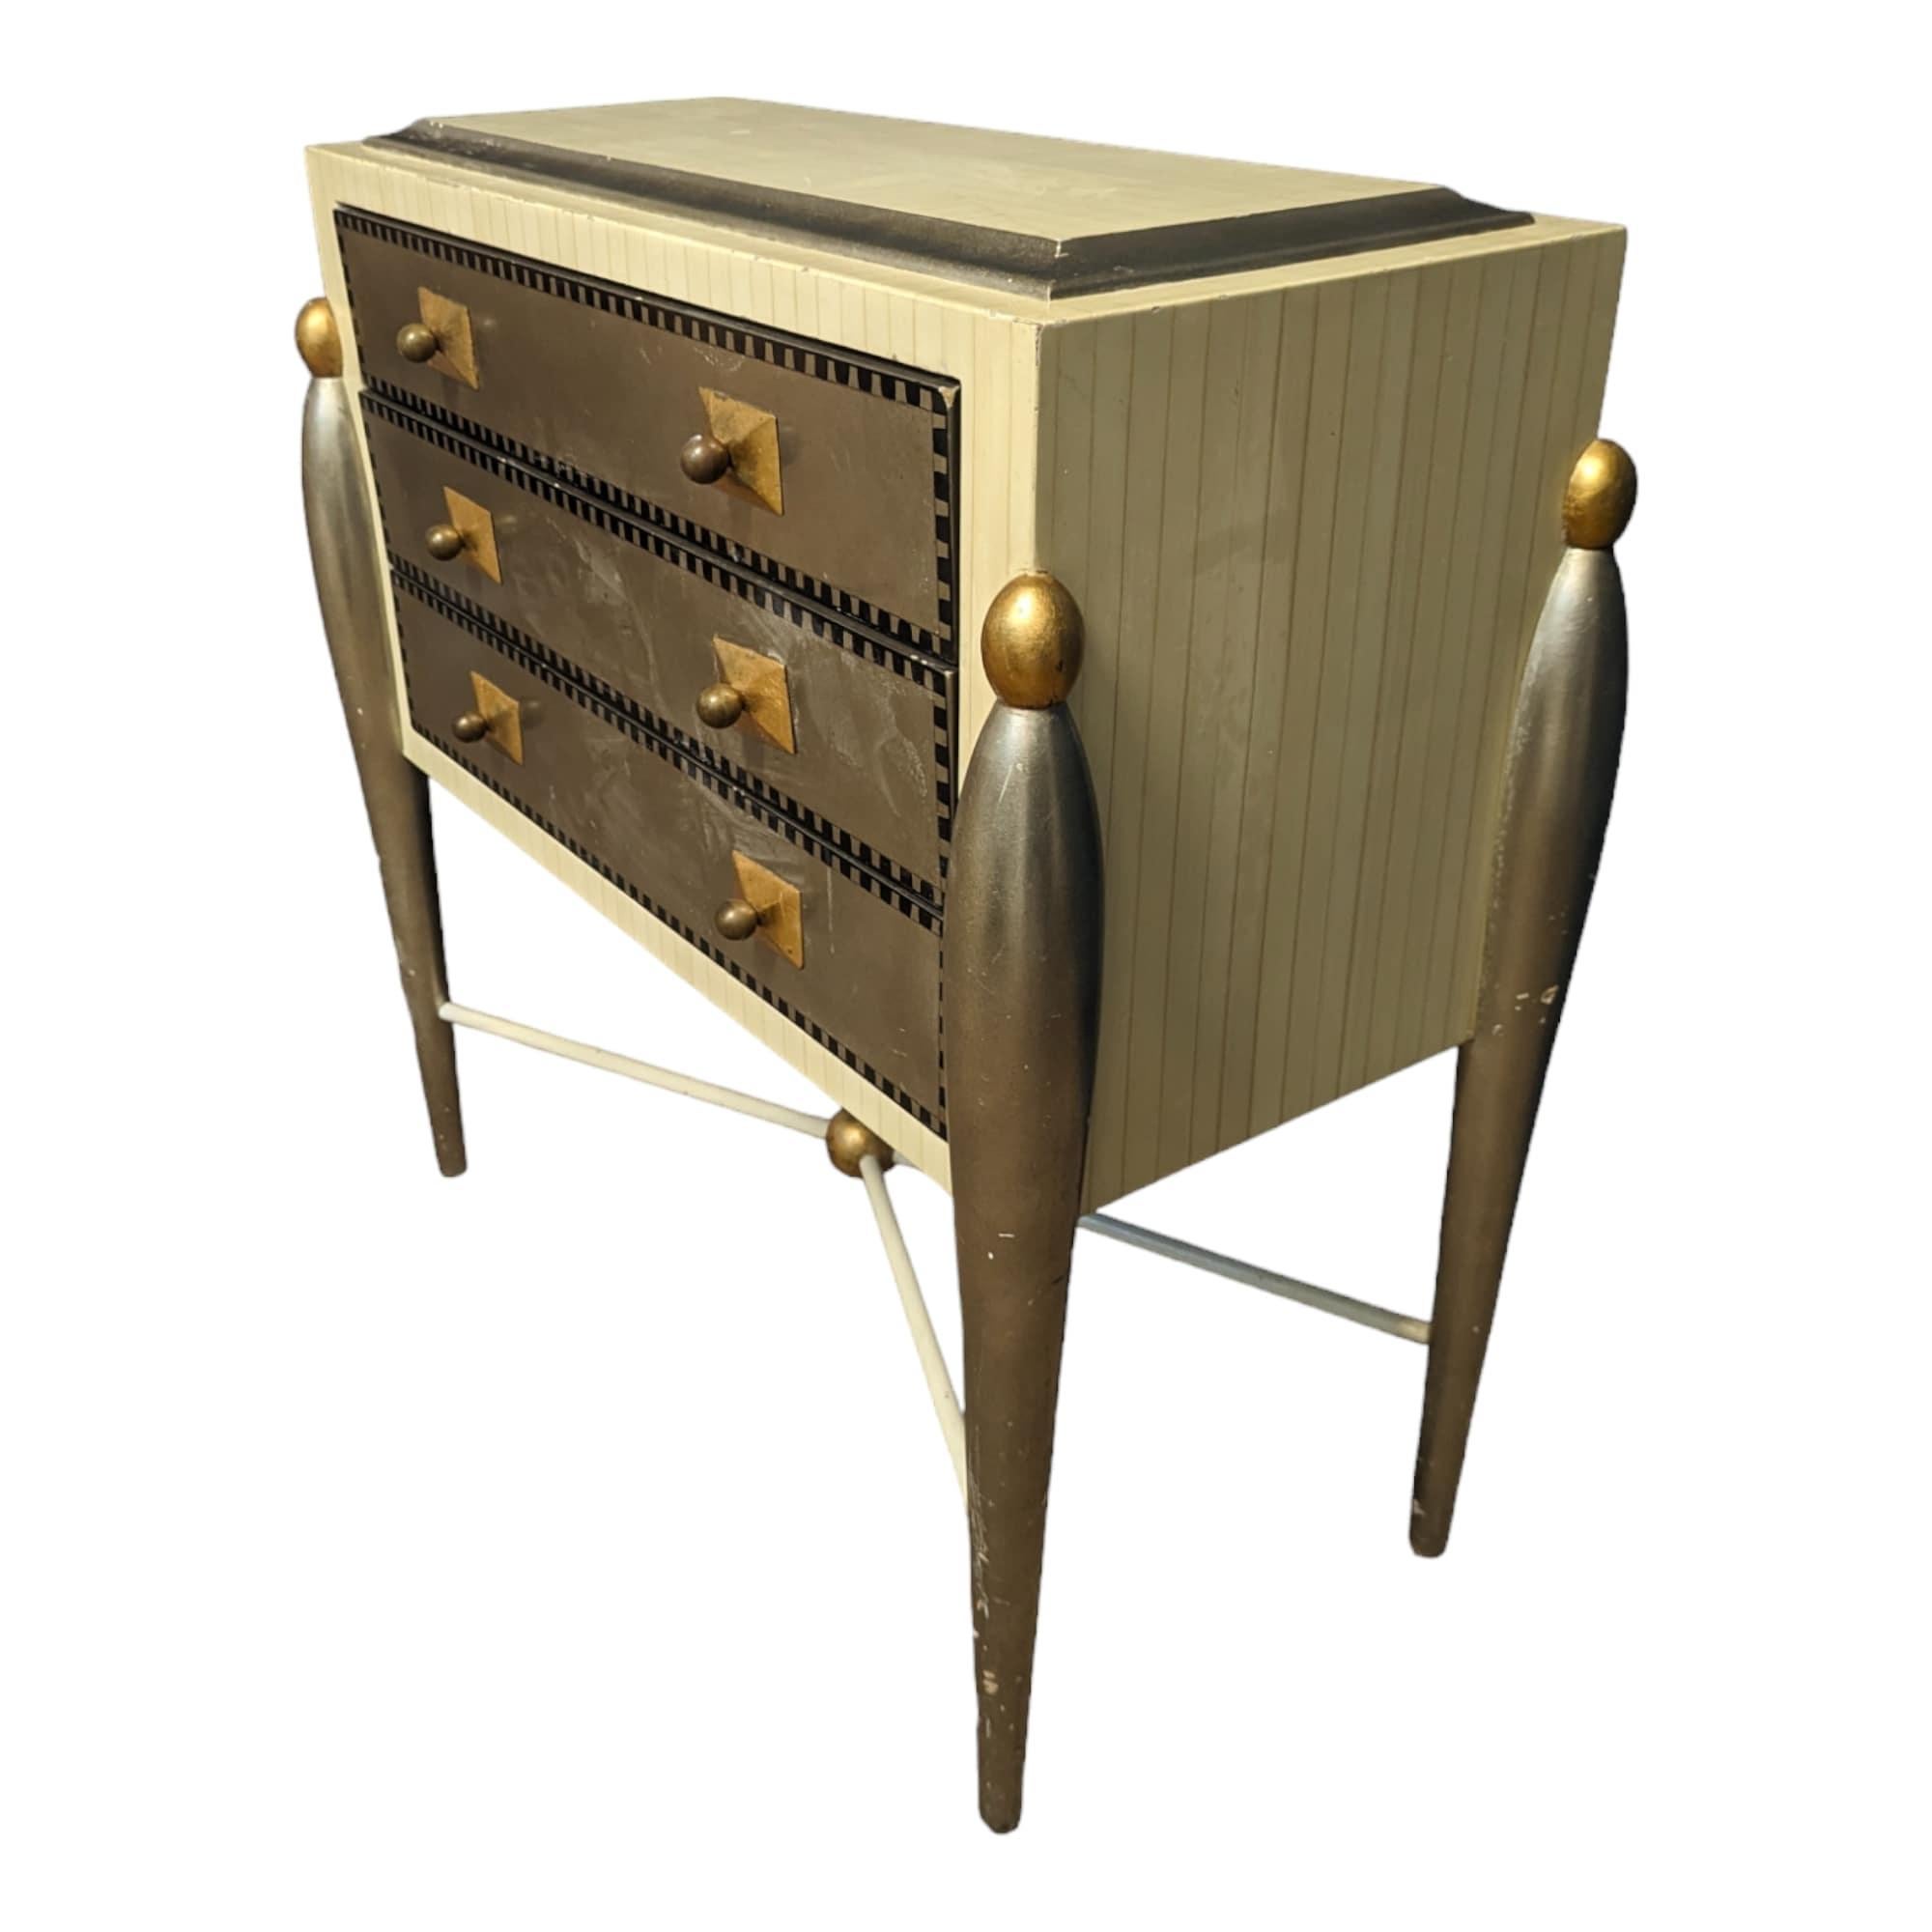 From Italy. Discover the boldness of Italian design with this remarkable Memphis-style chest of drawers, a piece that evokes the exuberance and creativity of this iconic art movement of the 1980s.

With its geometric shapes, bright colors and